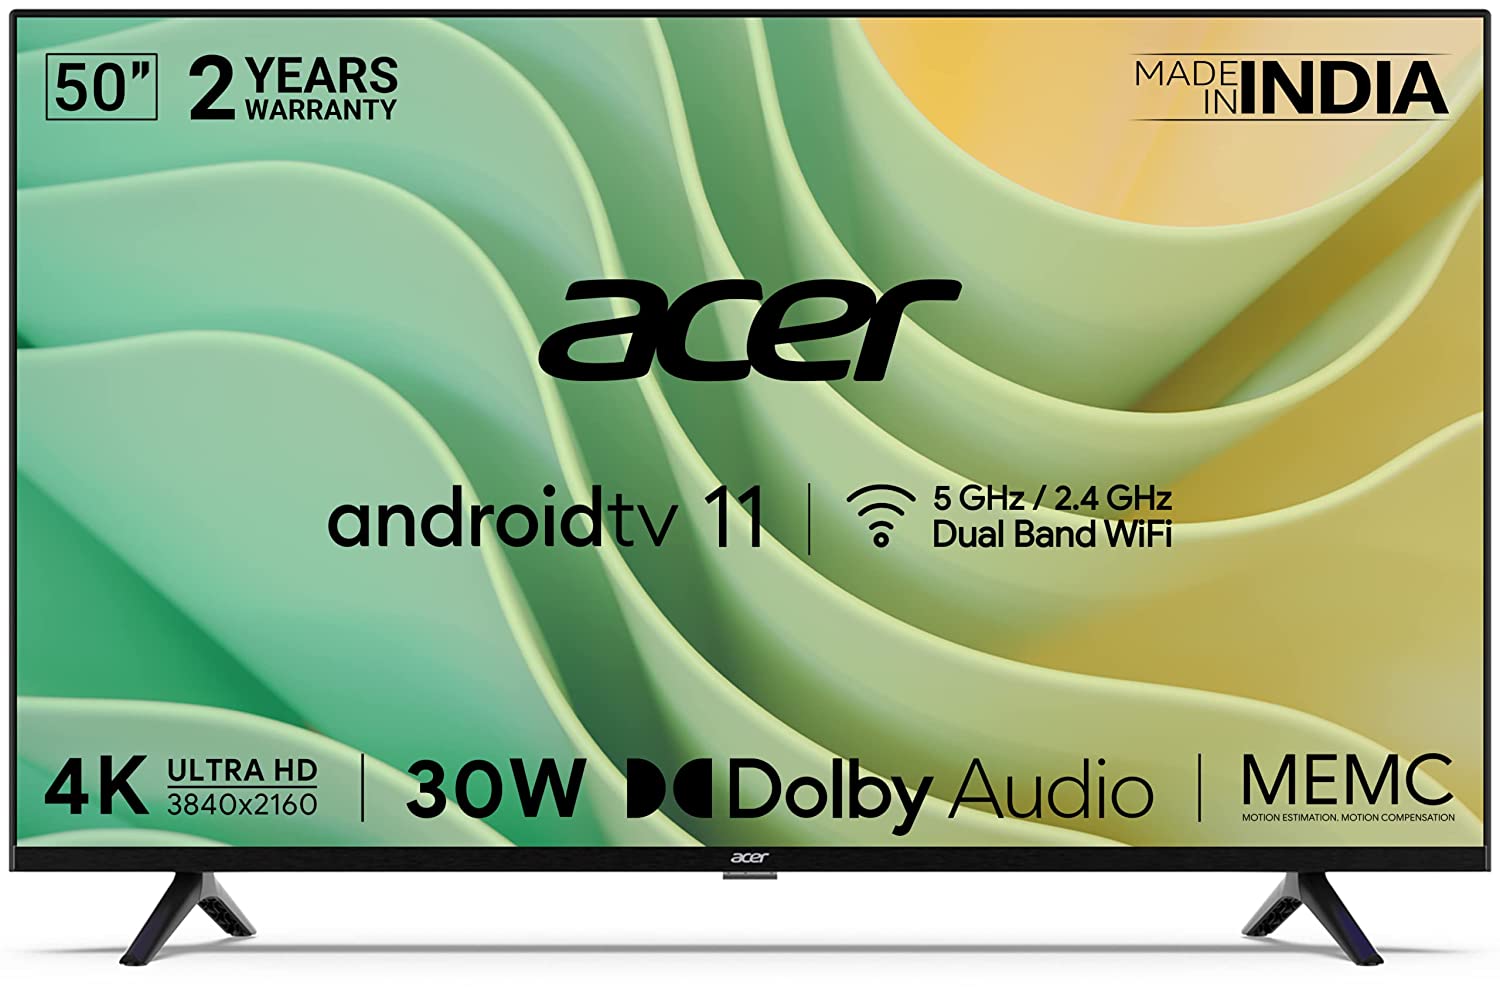 Acer 50 inches I Series Android Smart LED TV